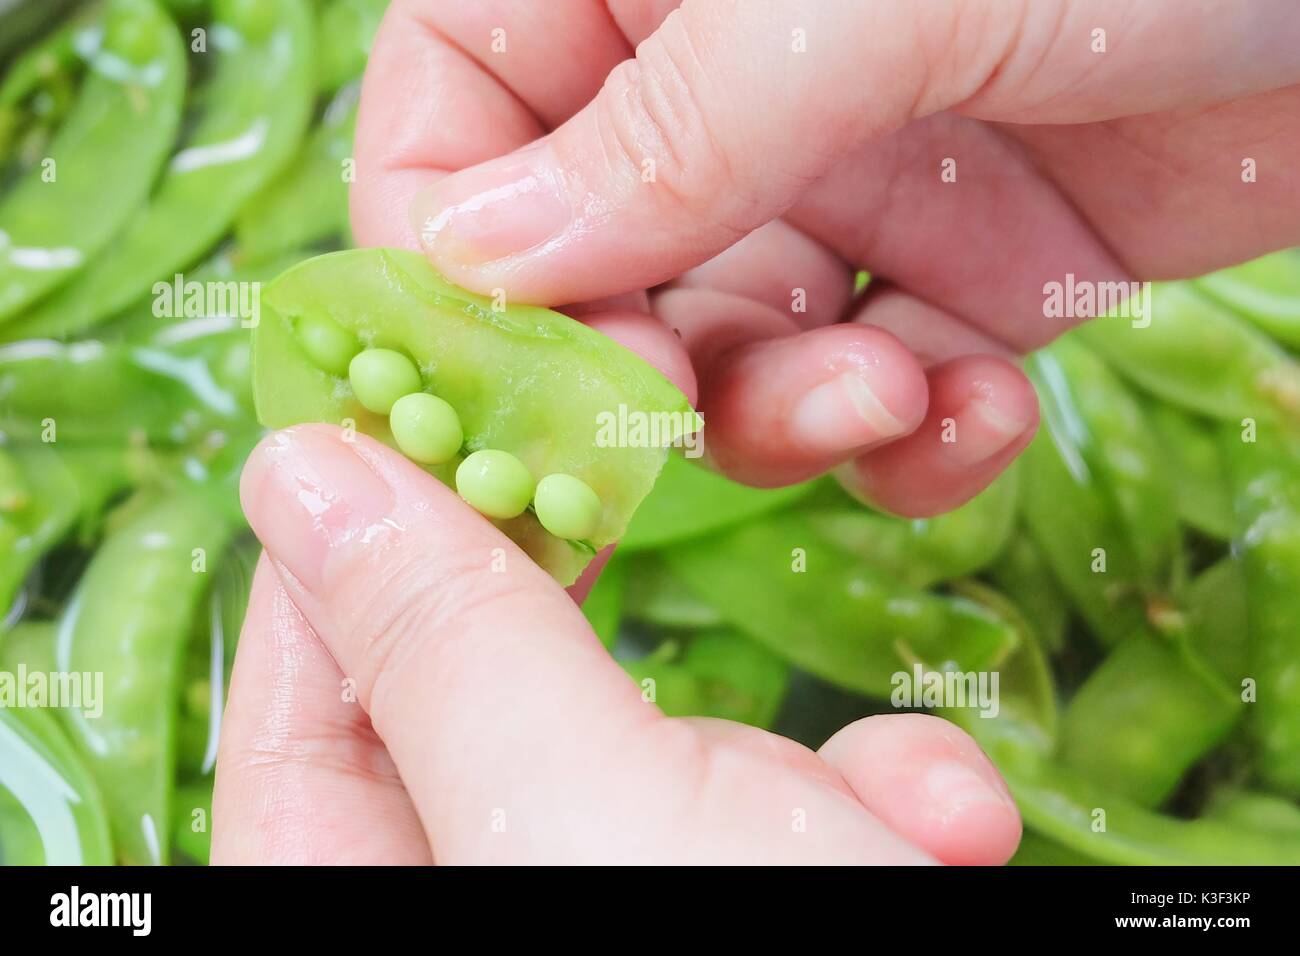 Vegetable, Hand Peeling Fresh Green Pea From A Pod and Cleaning in Water. Green Pea High in Vitamin K, B, C and A. Stock Photo